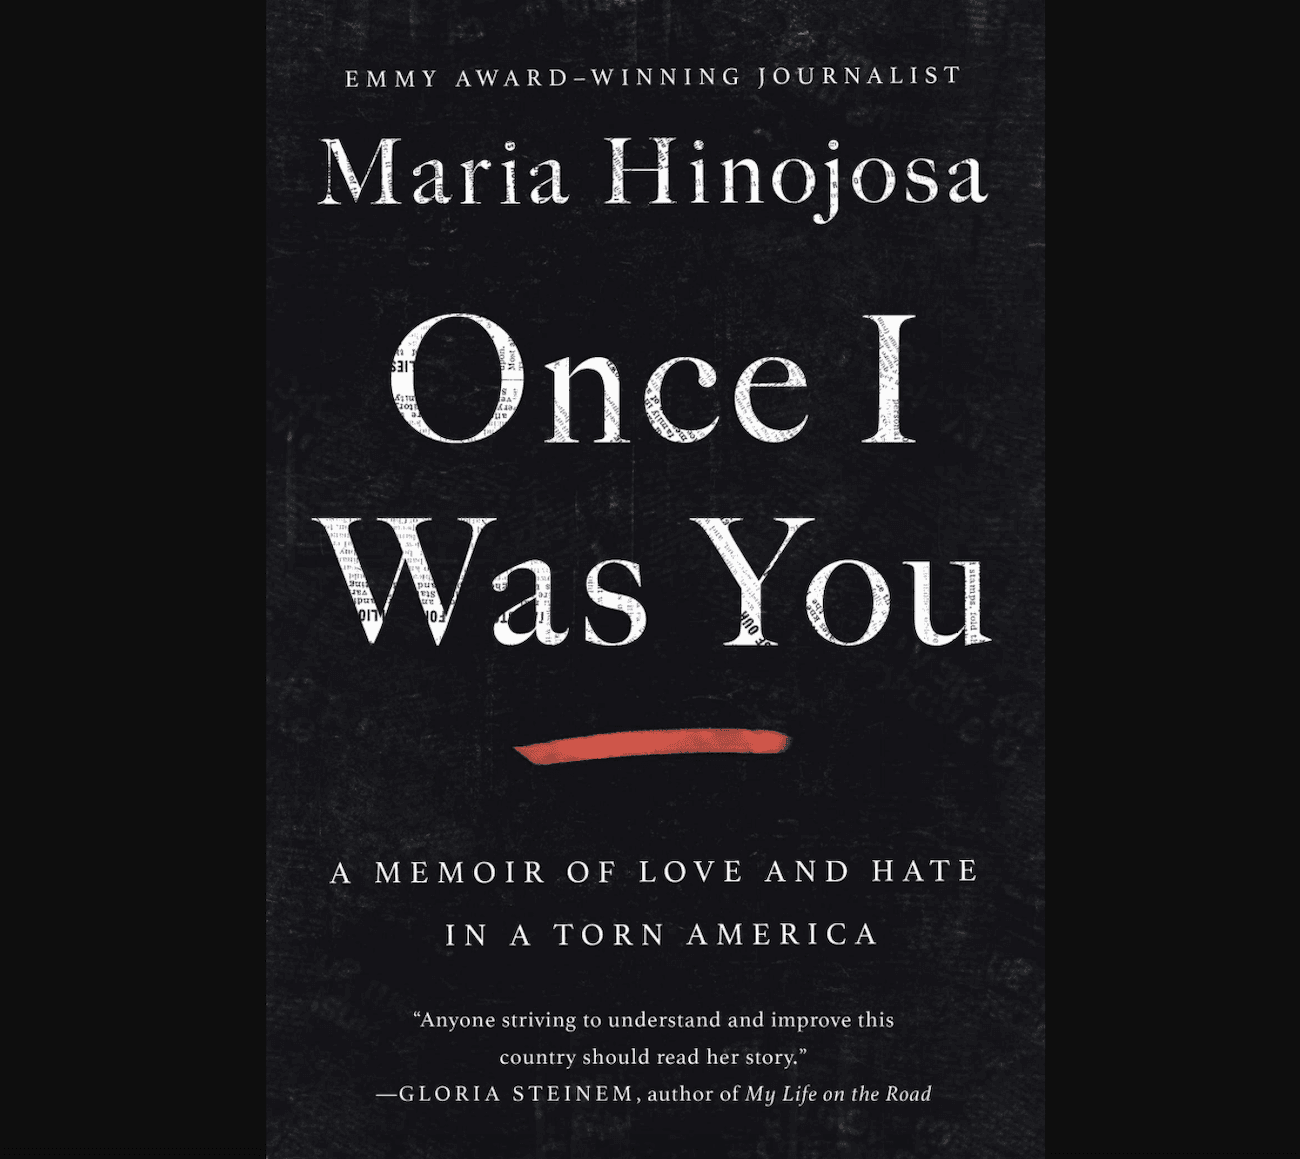 Thumbnail for "Once I Was You: A Conversation With Maria Hinojosa".